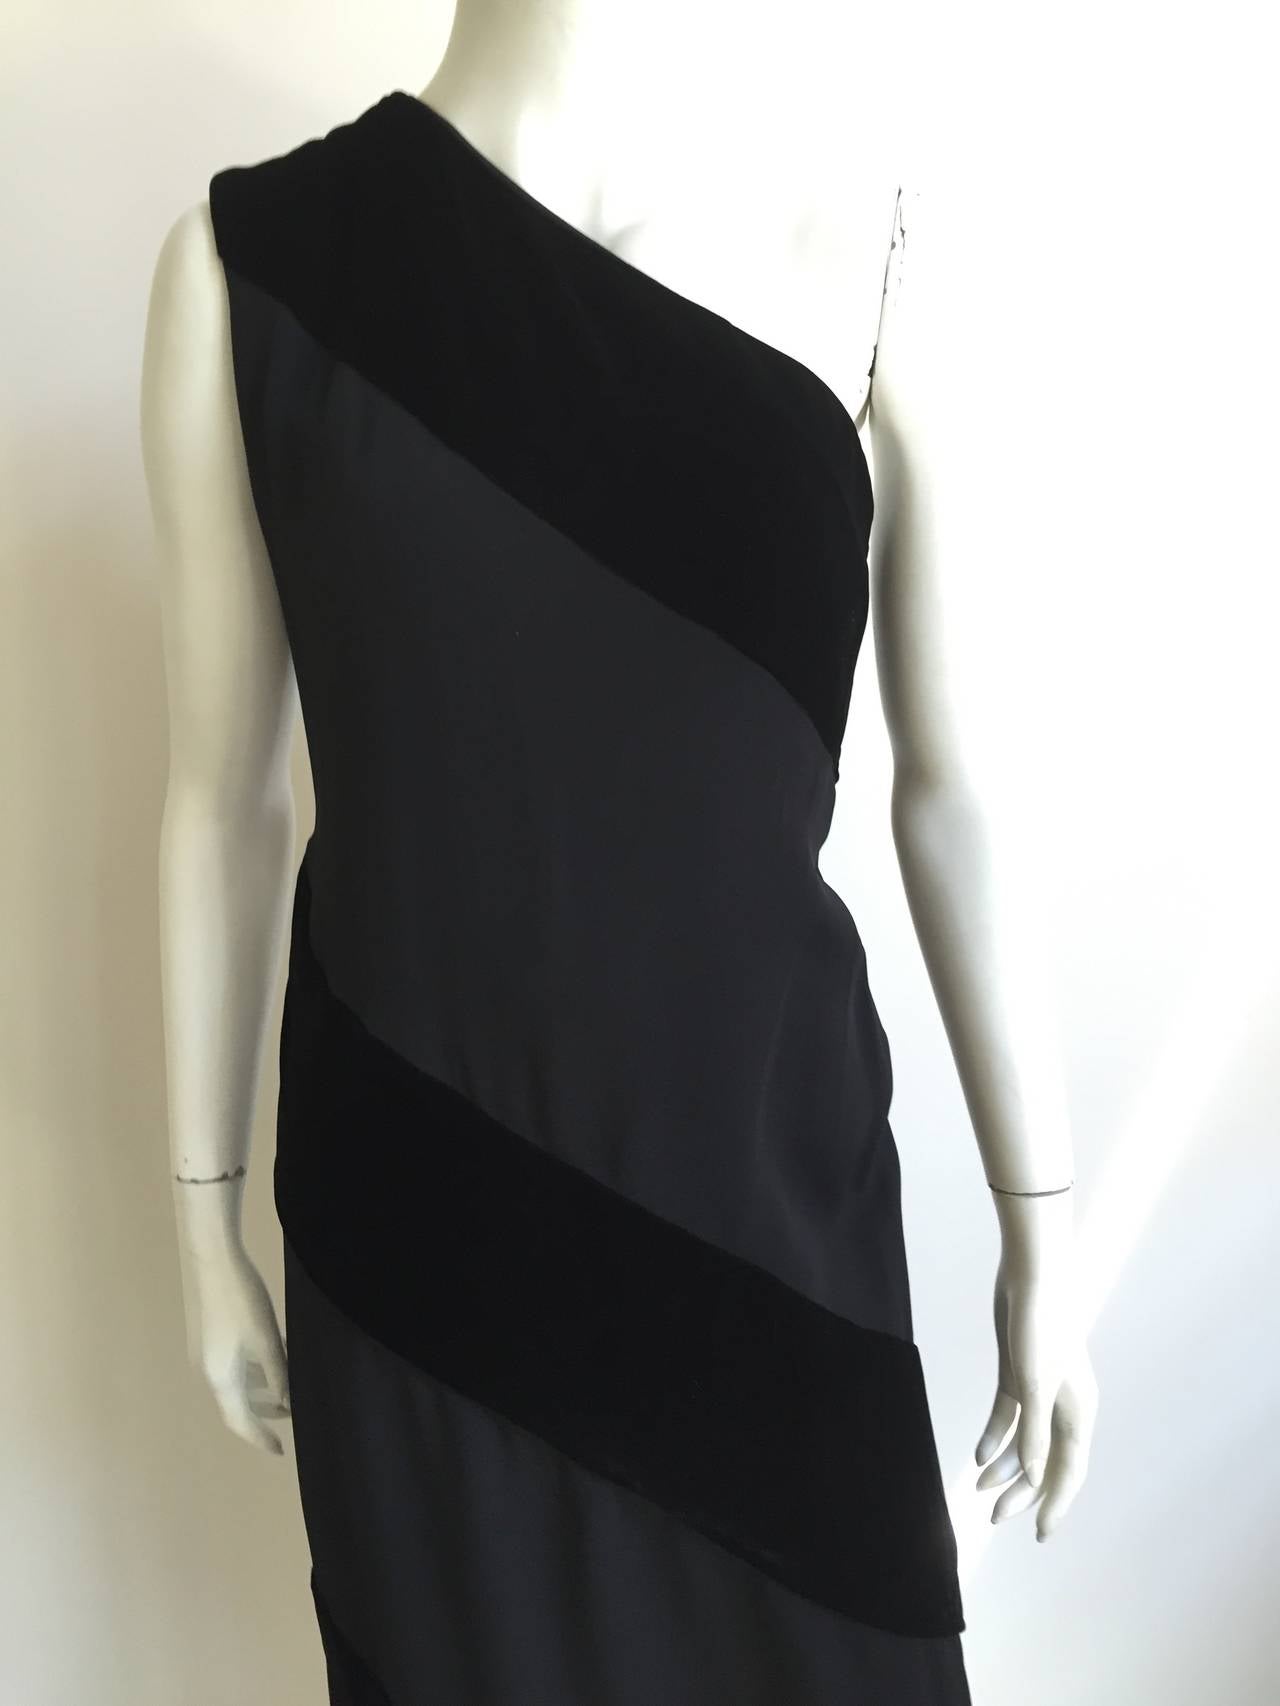 Carolyne Roehm 1980s black wool ~ black velvet spiral strip one shoulder black tie gown. Corset interior lining with own zipper for extra support. Gathered draped fabric at back of waist when lifted appears to be gown's train. Simply gorgeous and